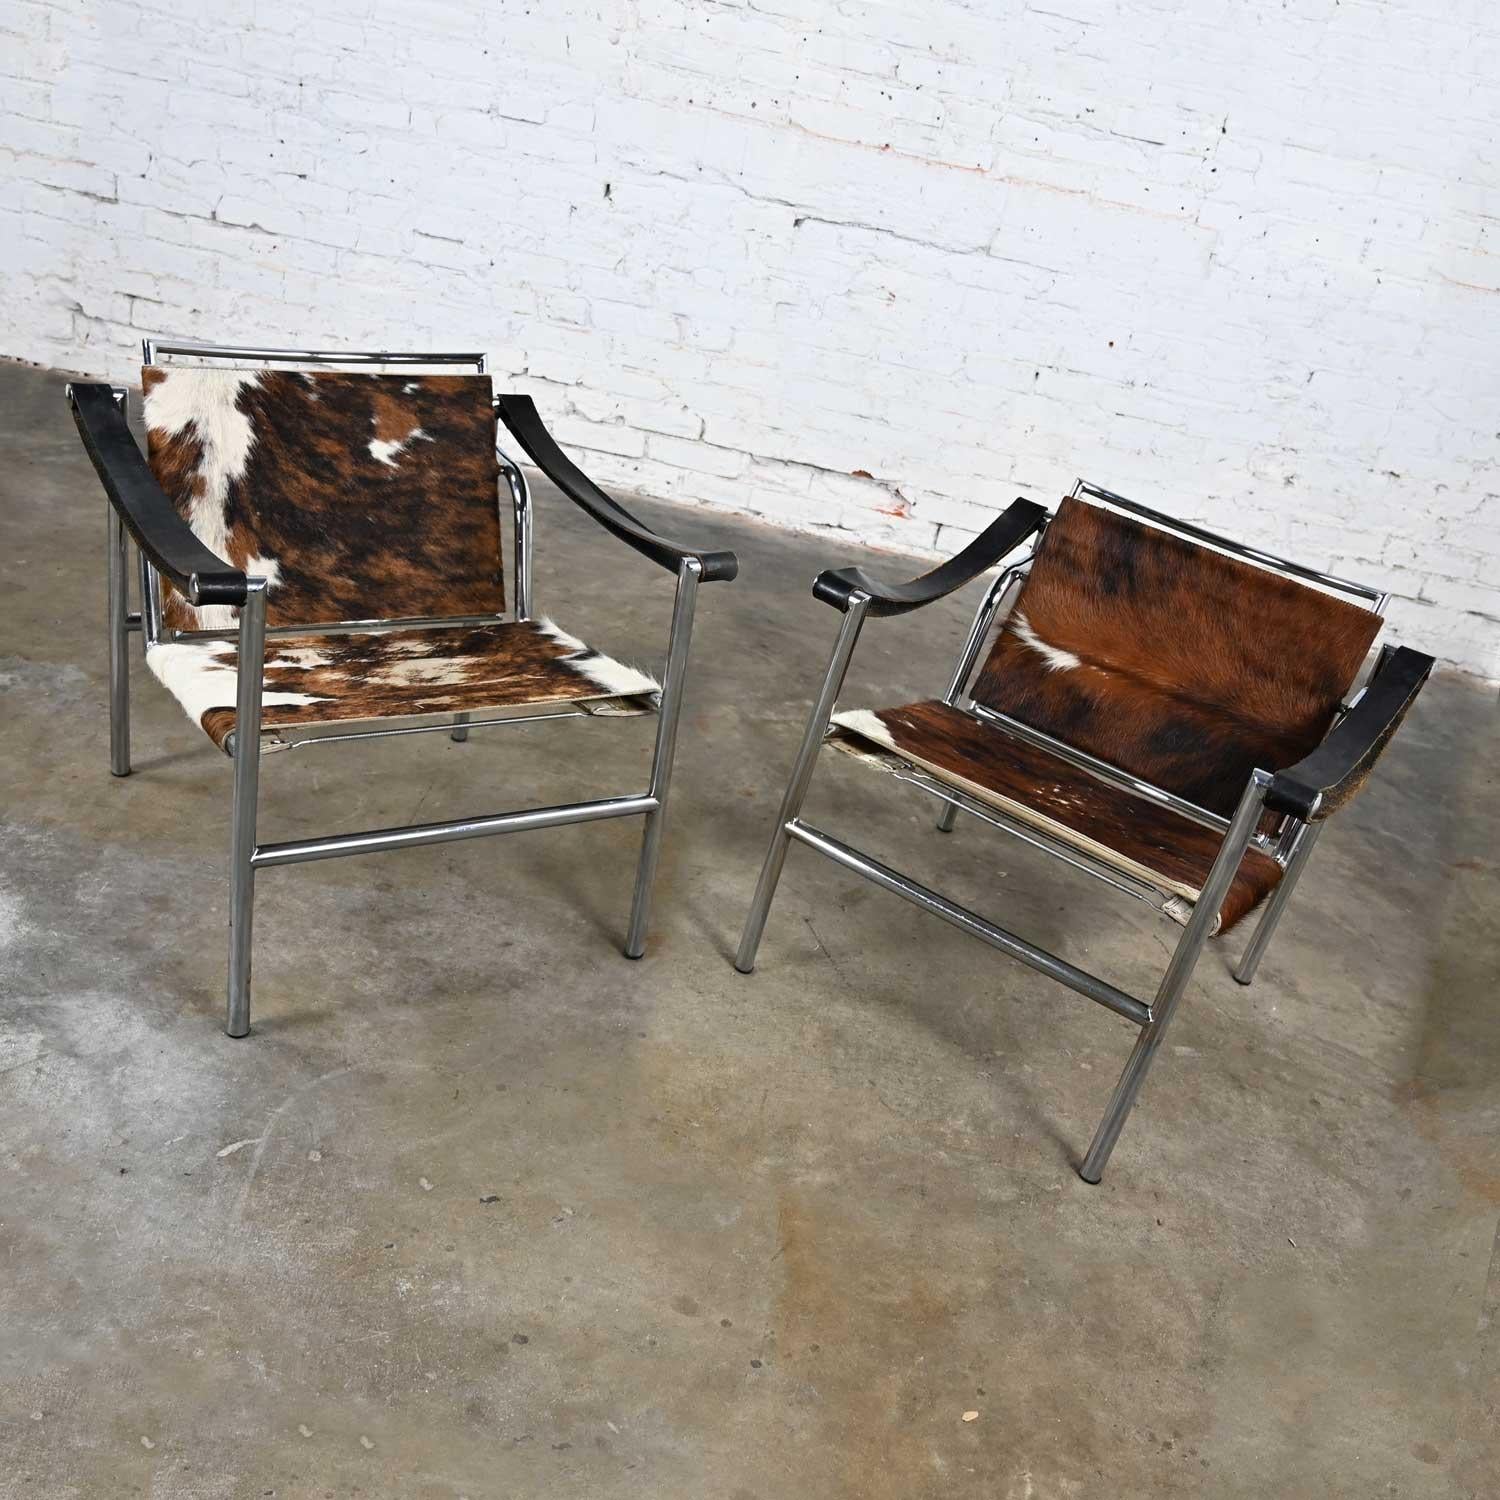 Gorgeous pair of vintage Modernist, Bauhaus, or Art Deco Basculant LC1 Sling Chairs attributed to Le Corbusier. Comprised of chrome plated tubular steel frames, spring seat platforms and back cross straps, black leather arm rest straps, and hair-on